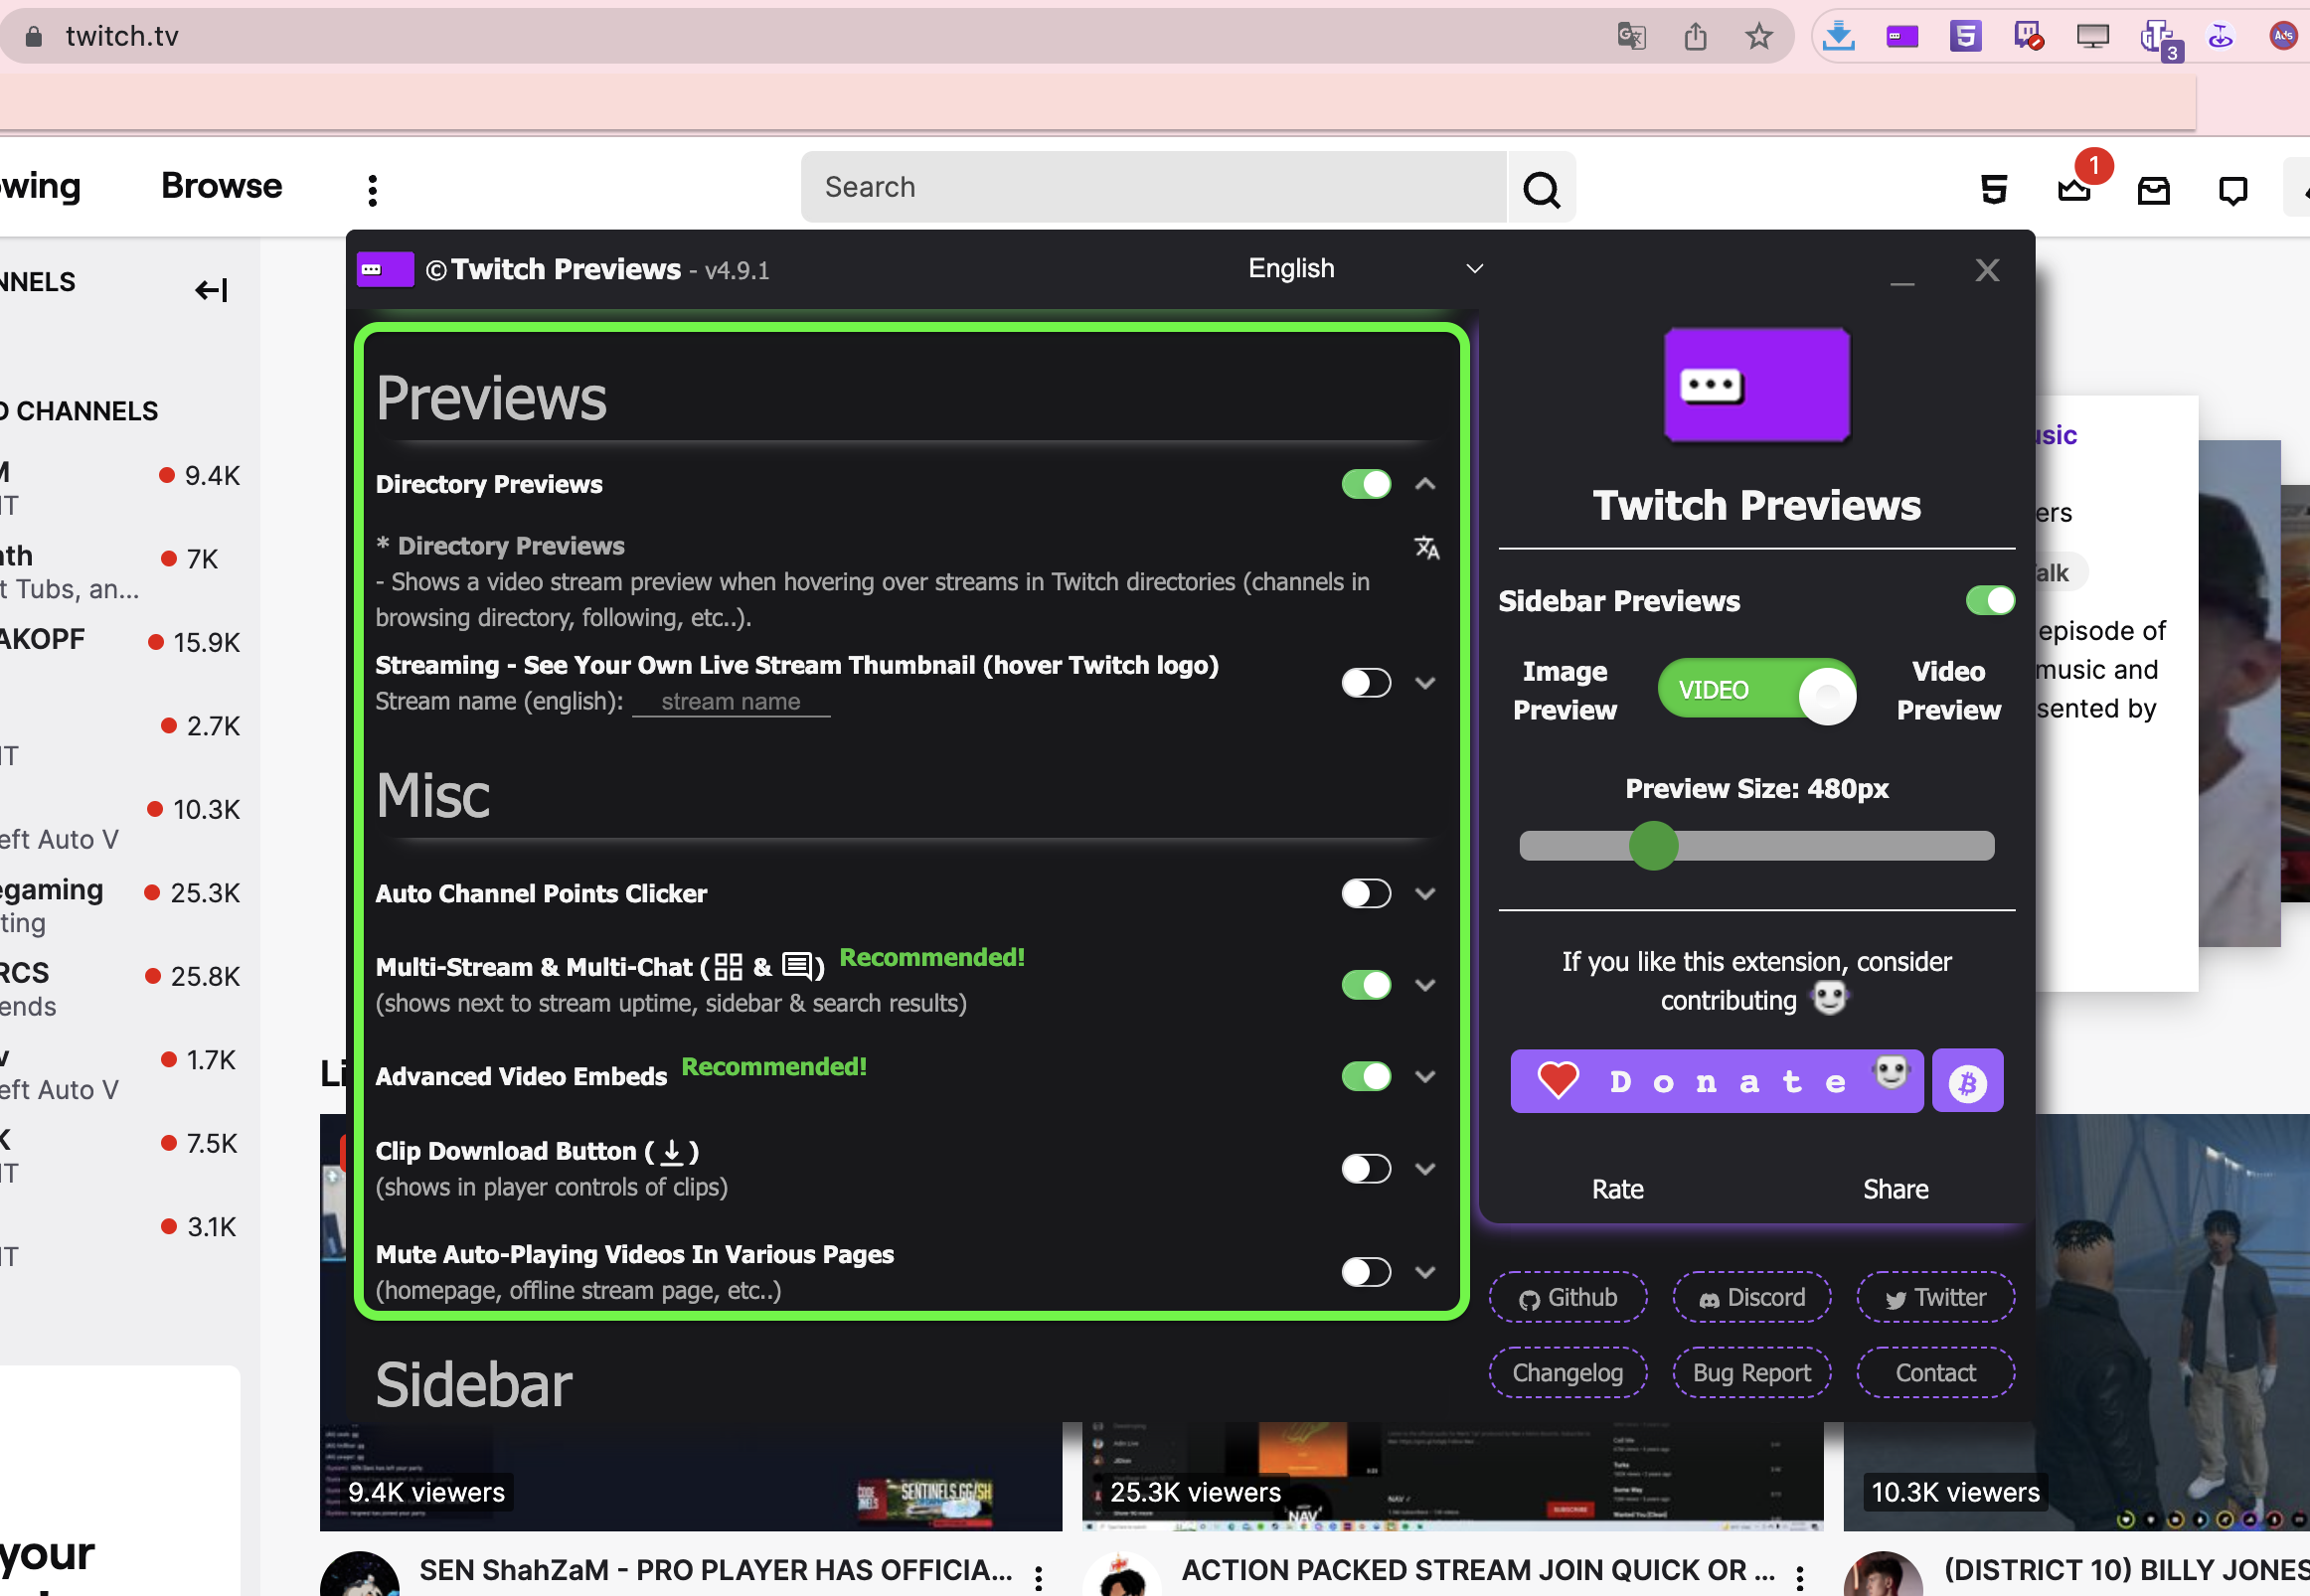 Twitch Previews - Live previews when hovering over streams on Twitch 